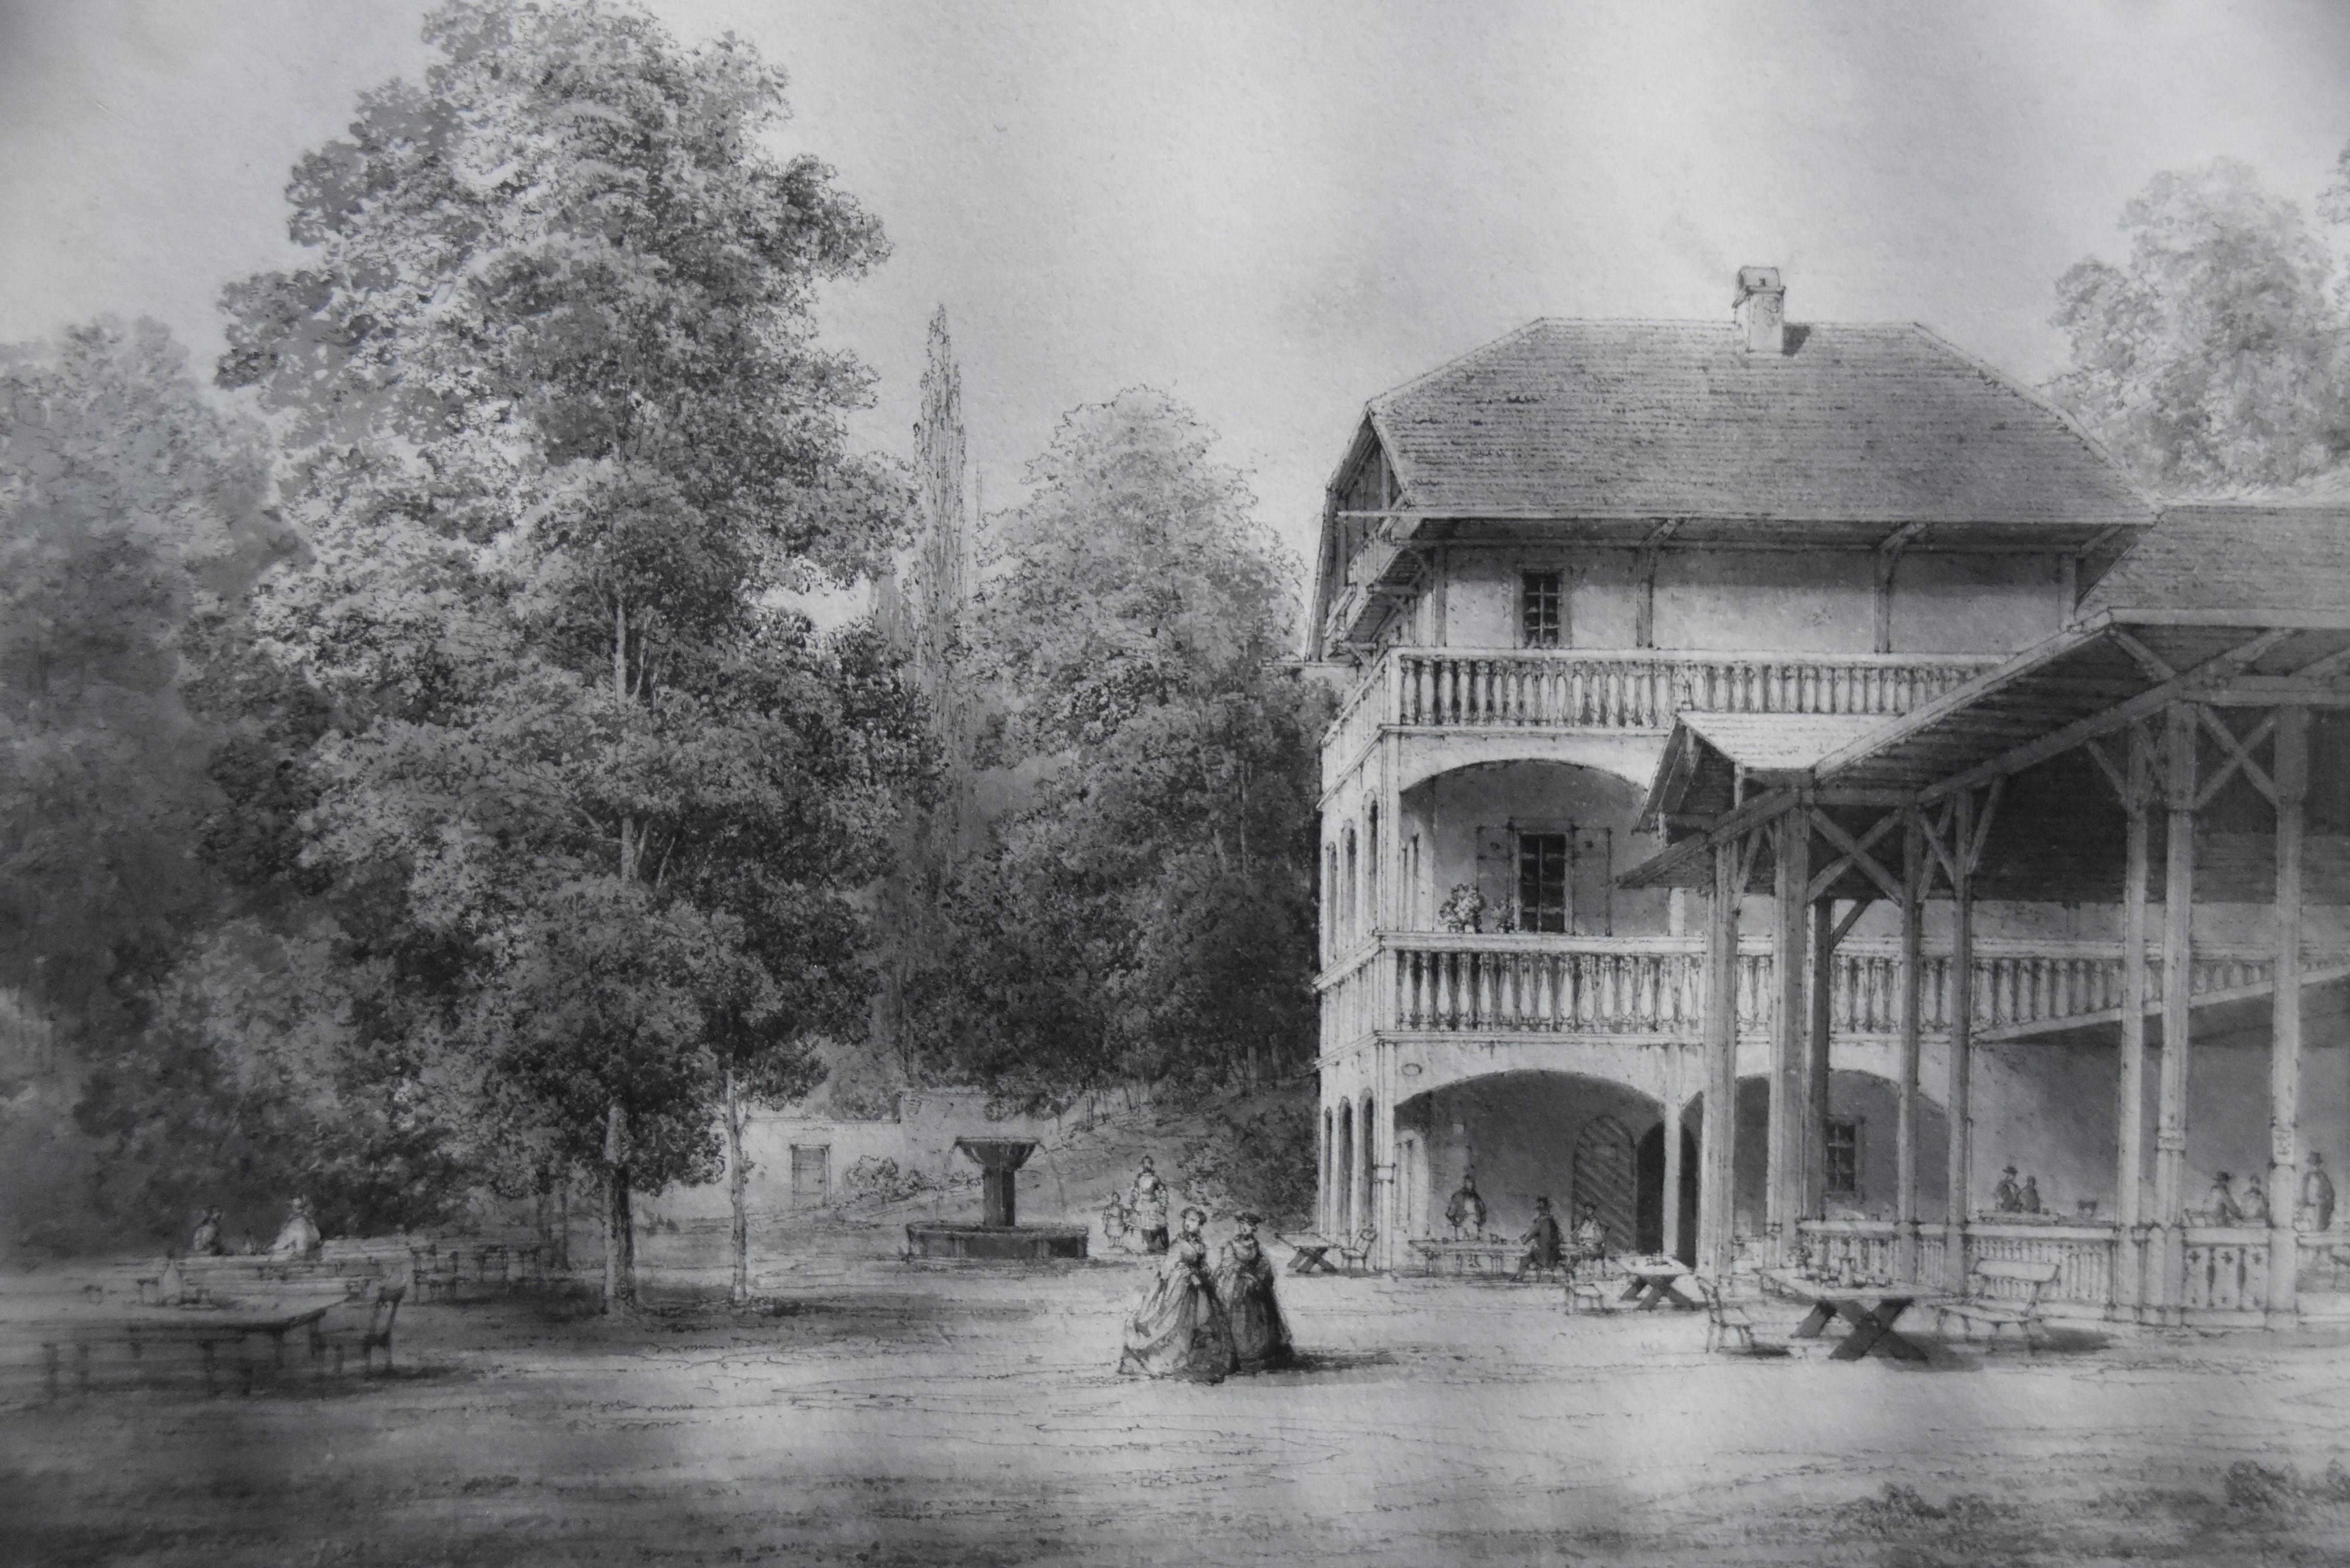 Romantic School, circa 1860
A pavilion in a garden , an animated view
Pen and black ink, black ink wash on paper
19.5 x 26.5 cm
In good condition, slightly undulating.
Framed : 39 x 47 cm (some damages to the frame as visible on the